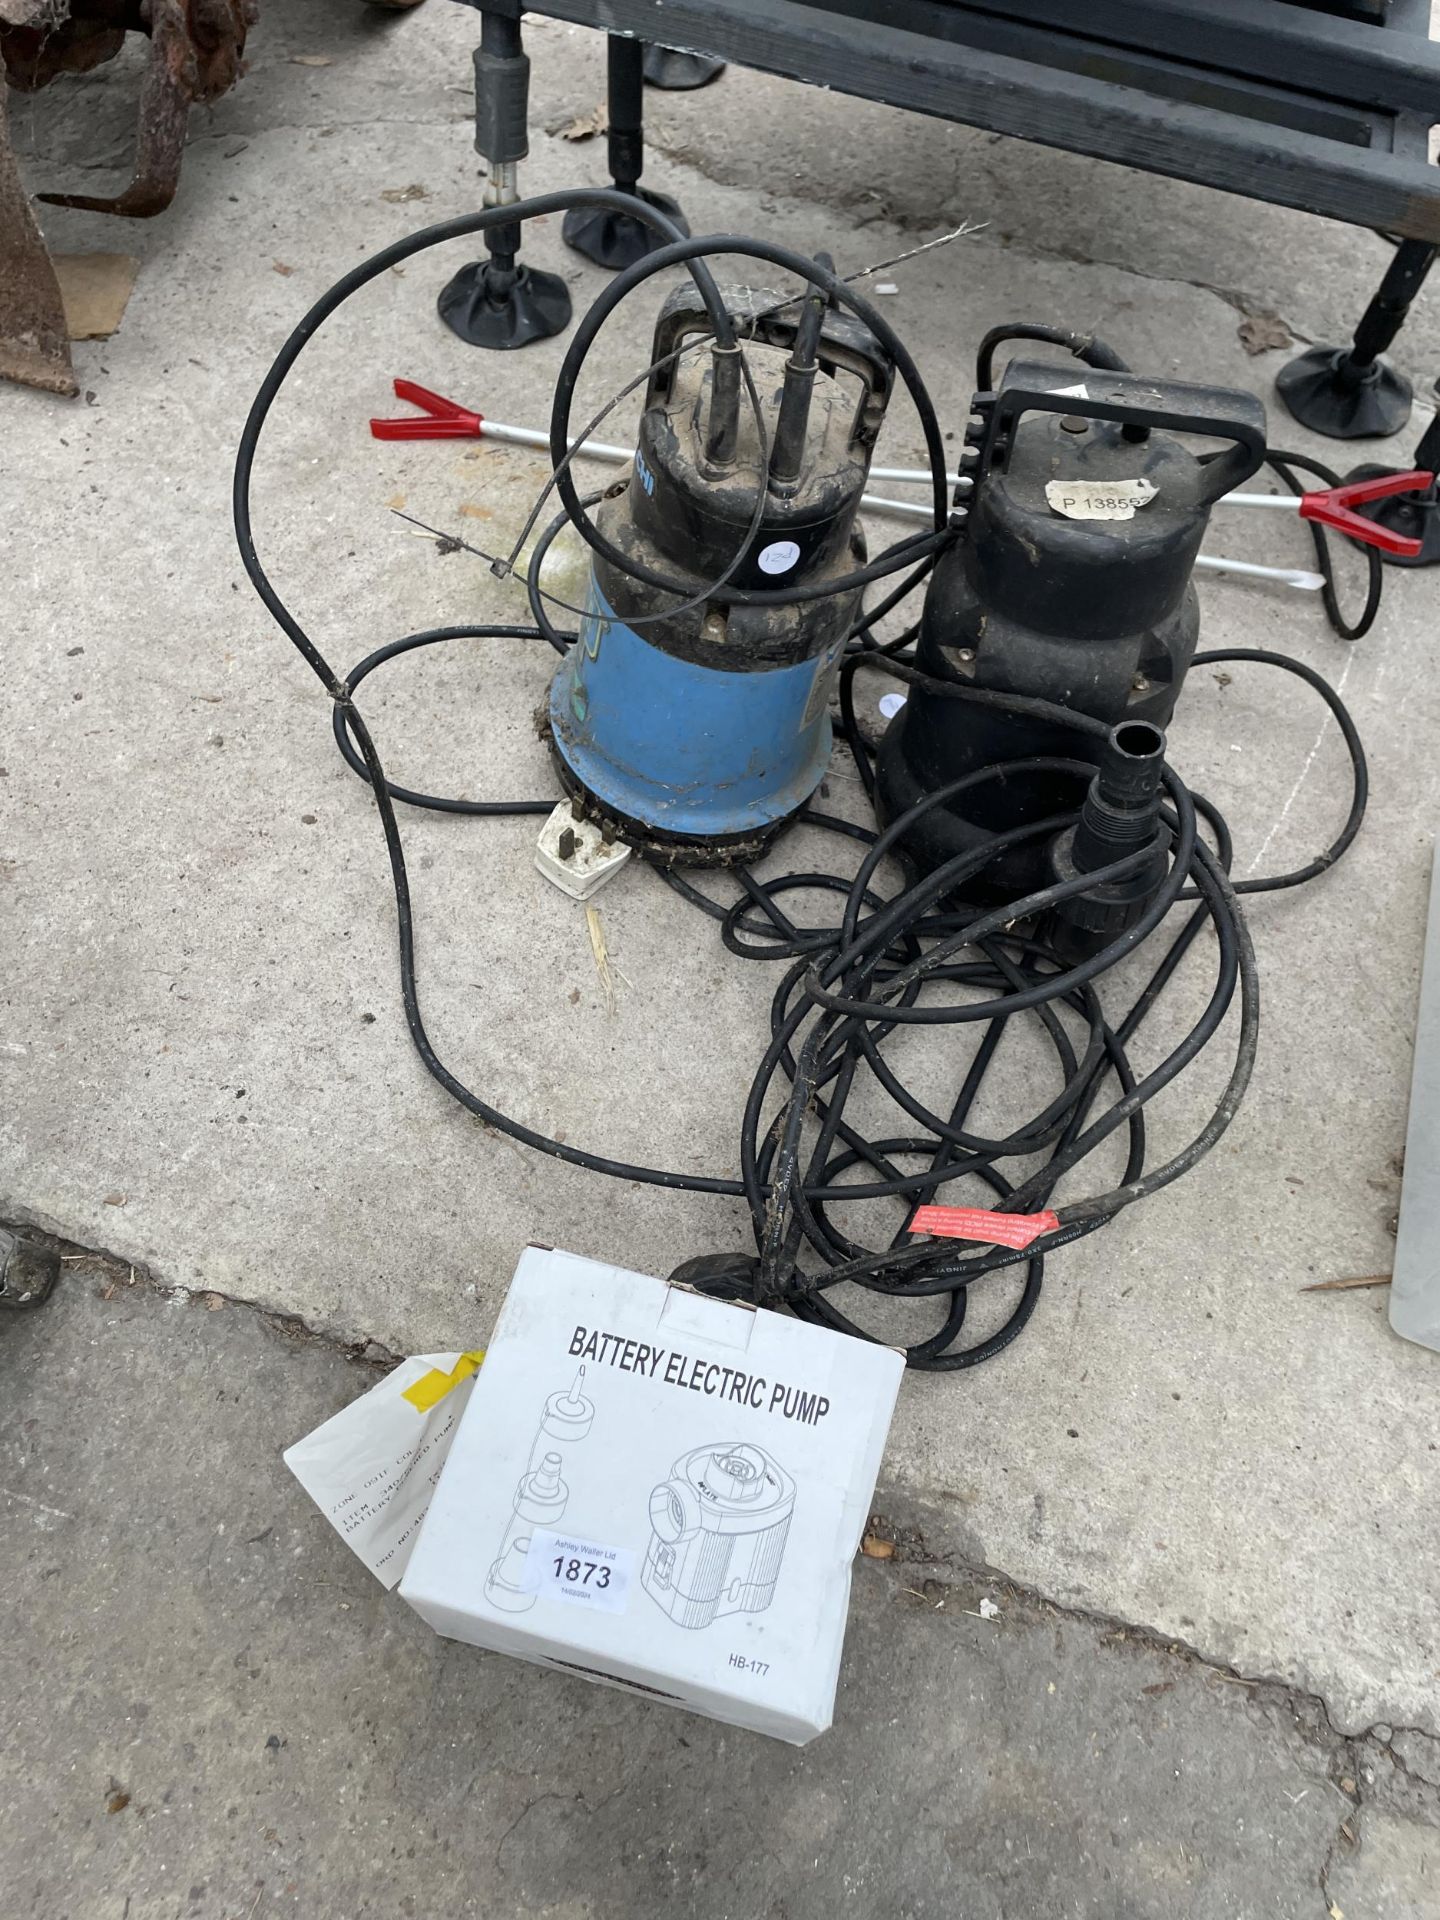 TWO SUBMERSIBLE PUMPS AND AN ELECTRIC BATTERY PUMP